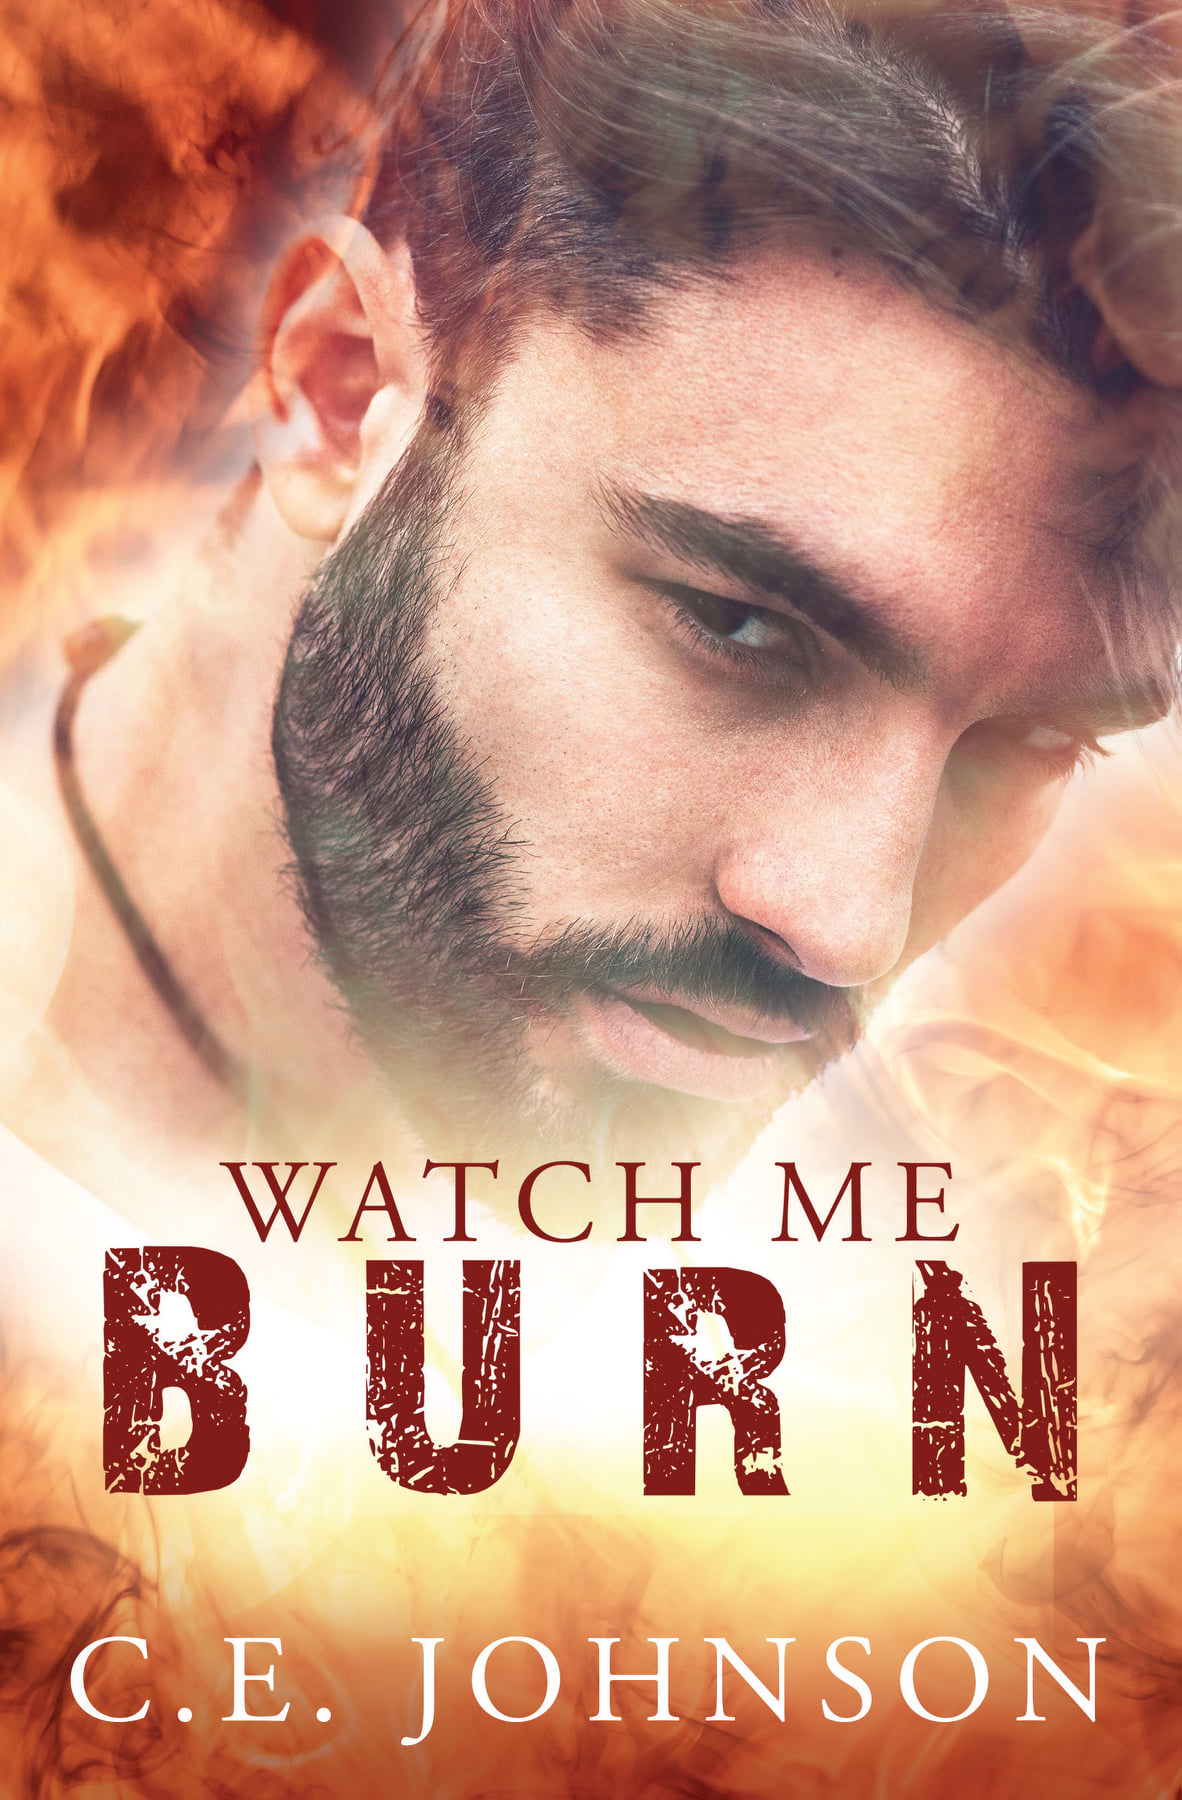 Watch Me Burn by C.E. Johnson is one of the March 2021 new book releases.